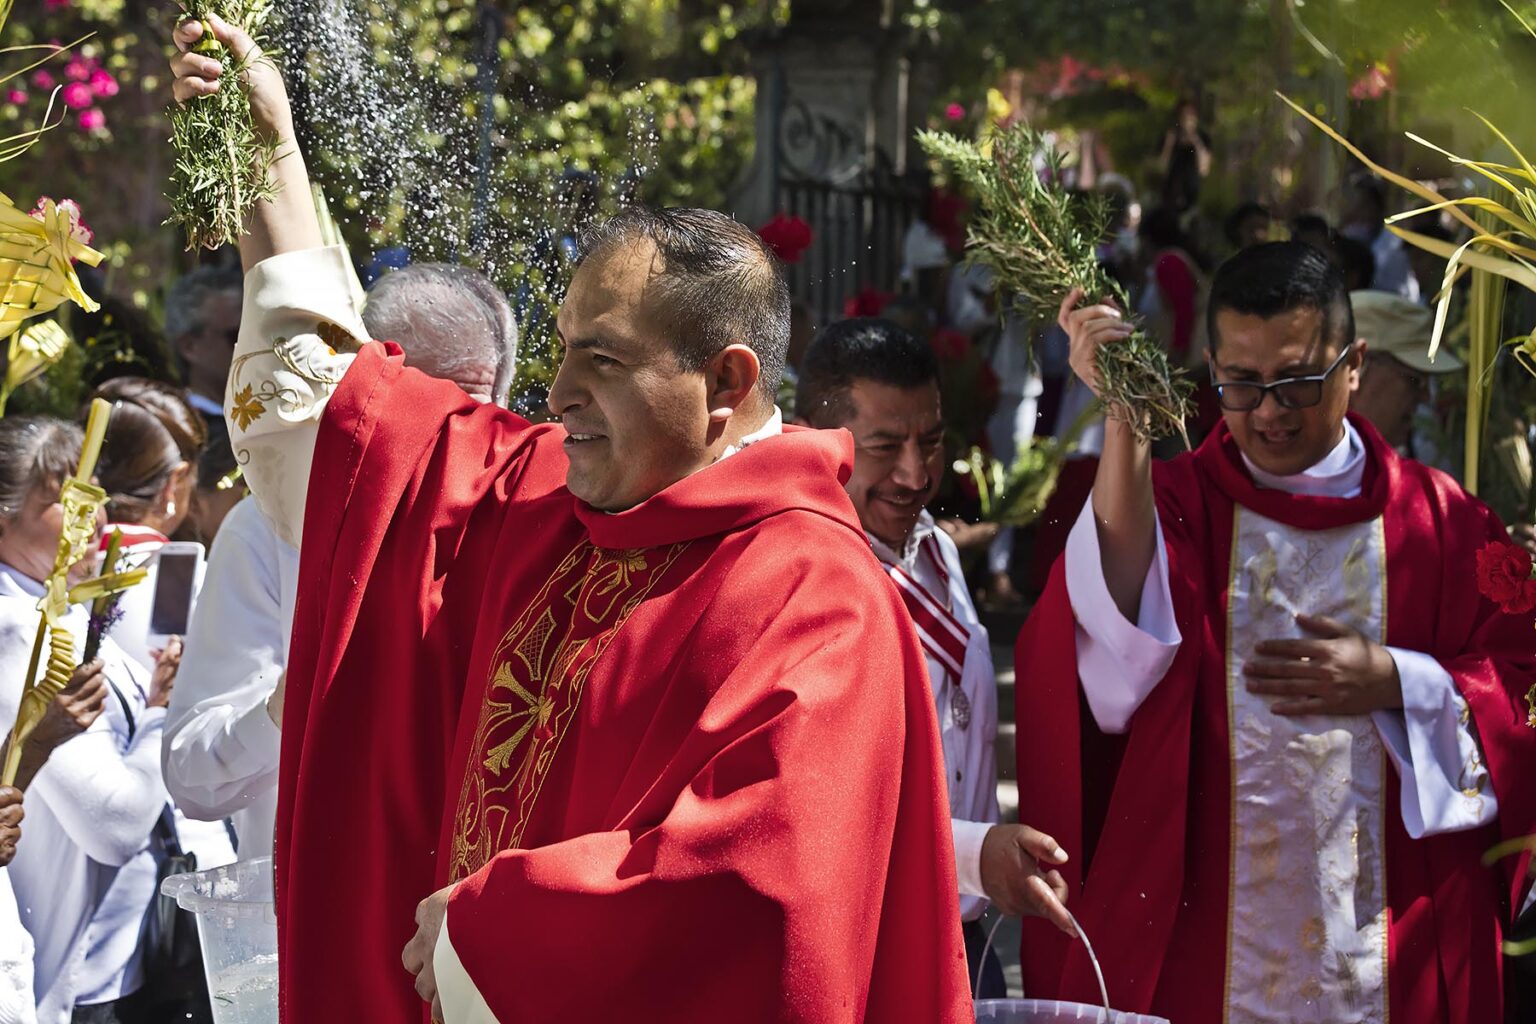 Mexicans line up for a blessing at the start of the PALM SUNDAY procession from Parque Juarez to the Jardin - SAN MIGUEL DE ALLENDE, MEXICO